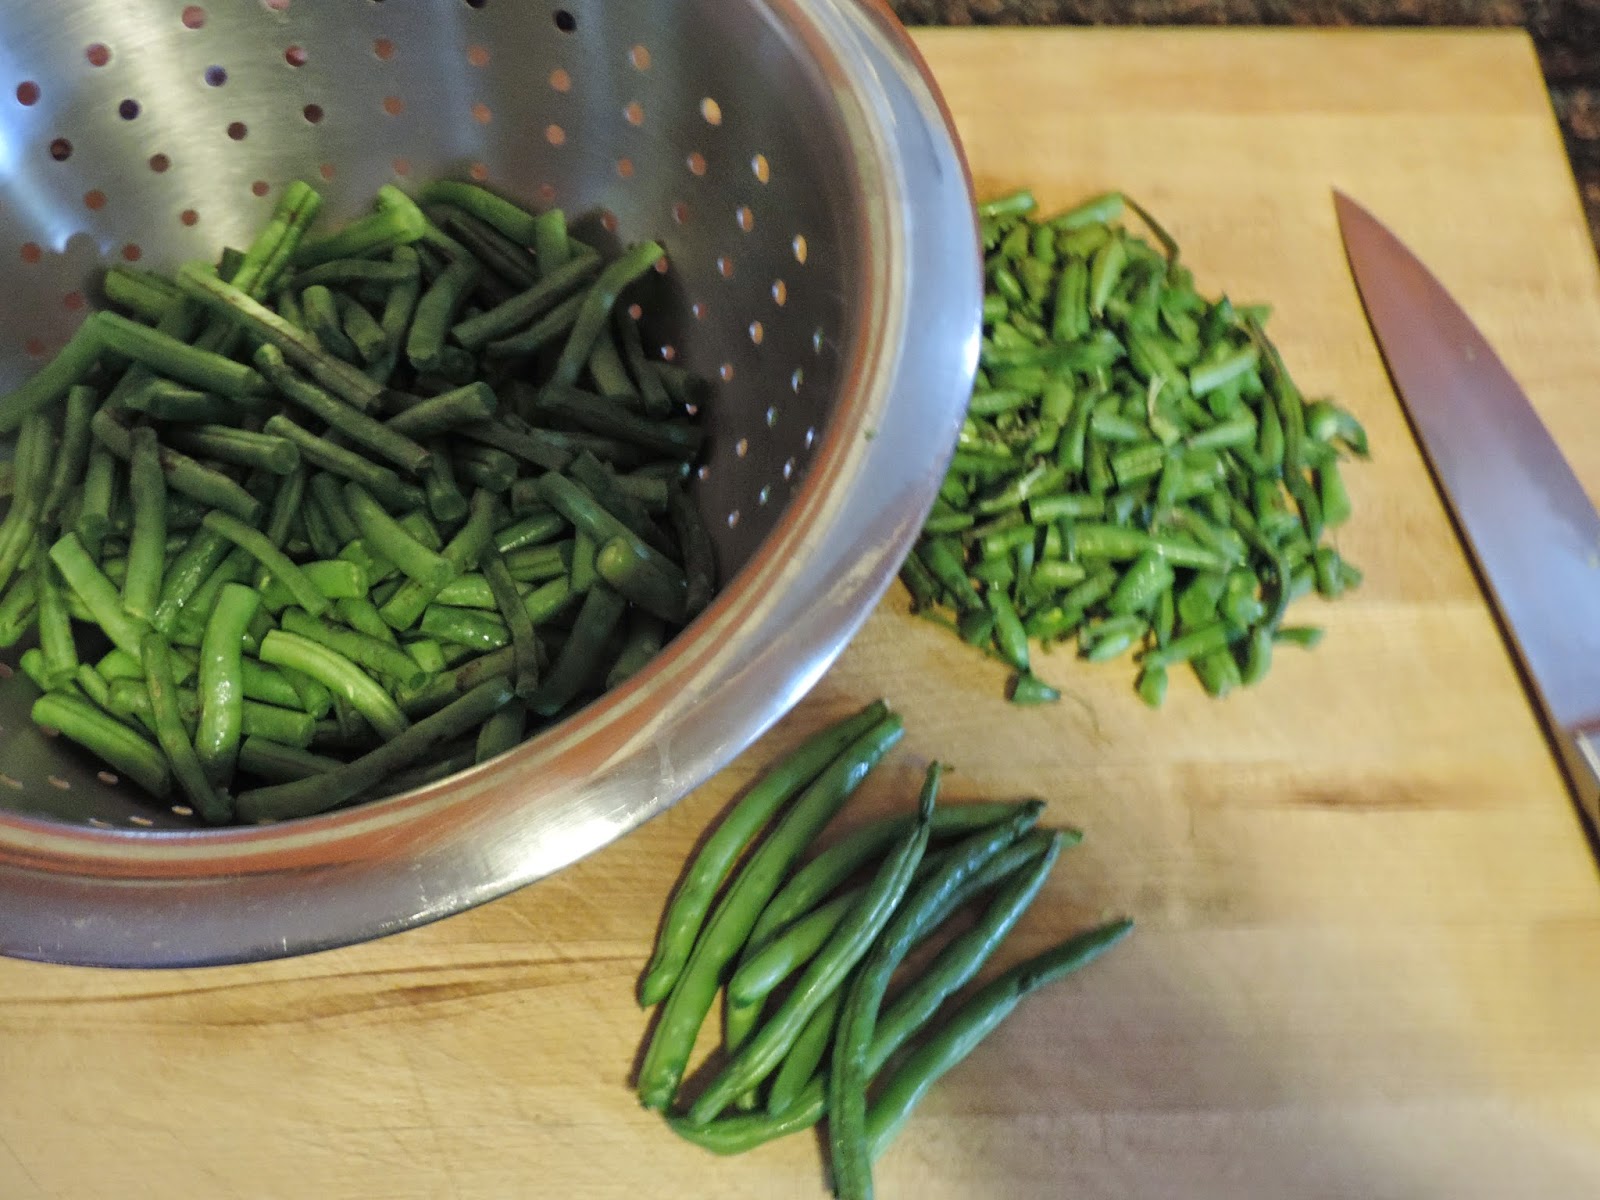 The green beans being trimmed and put in a strainer.  